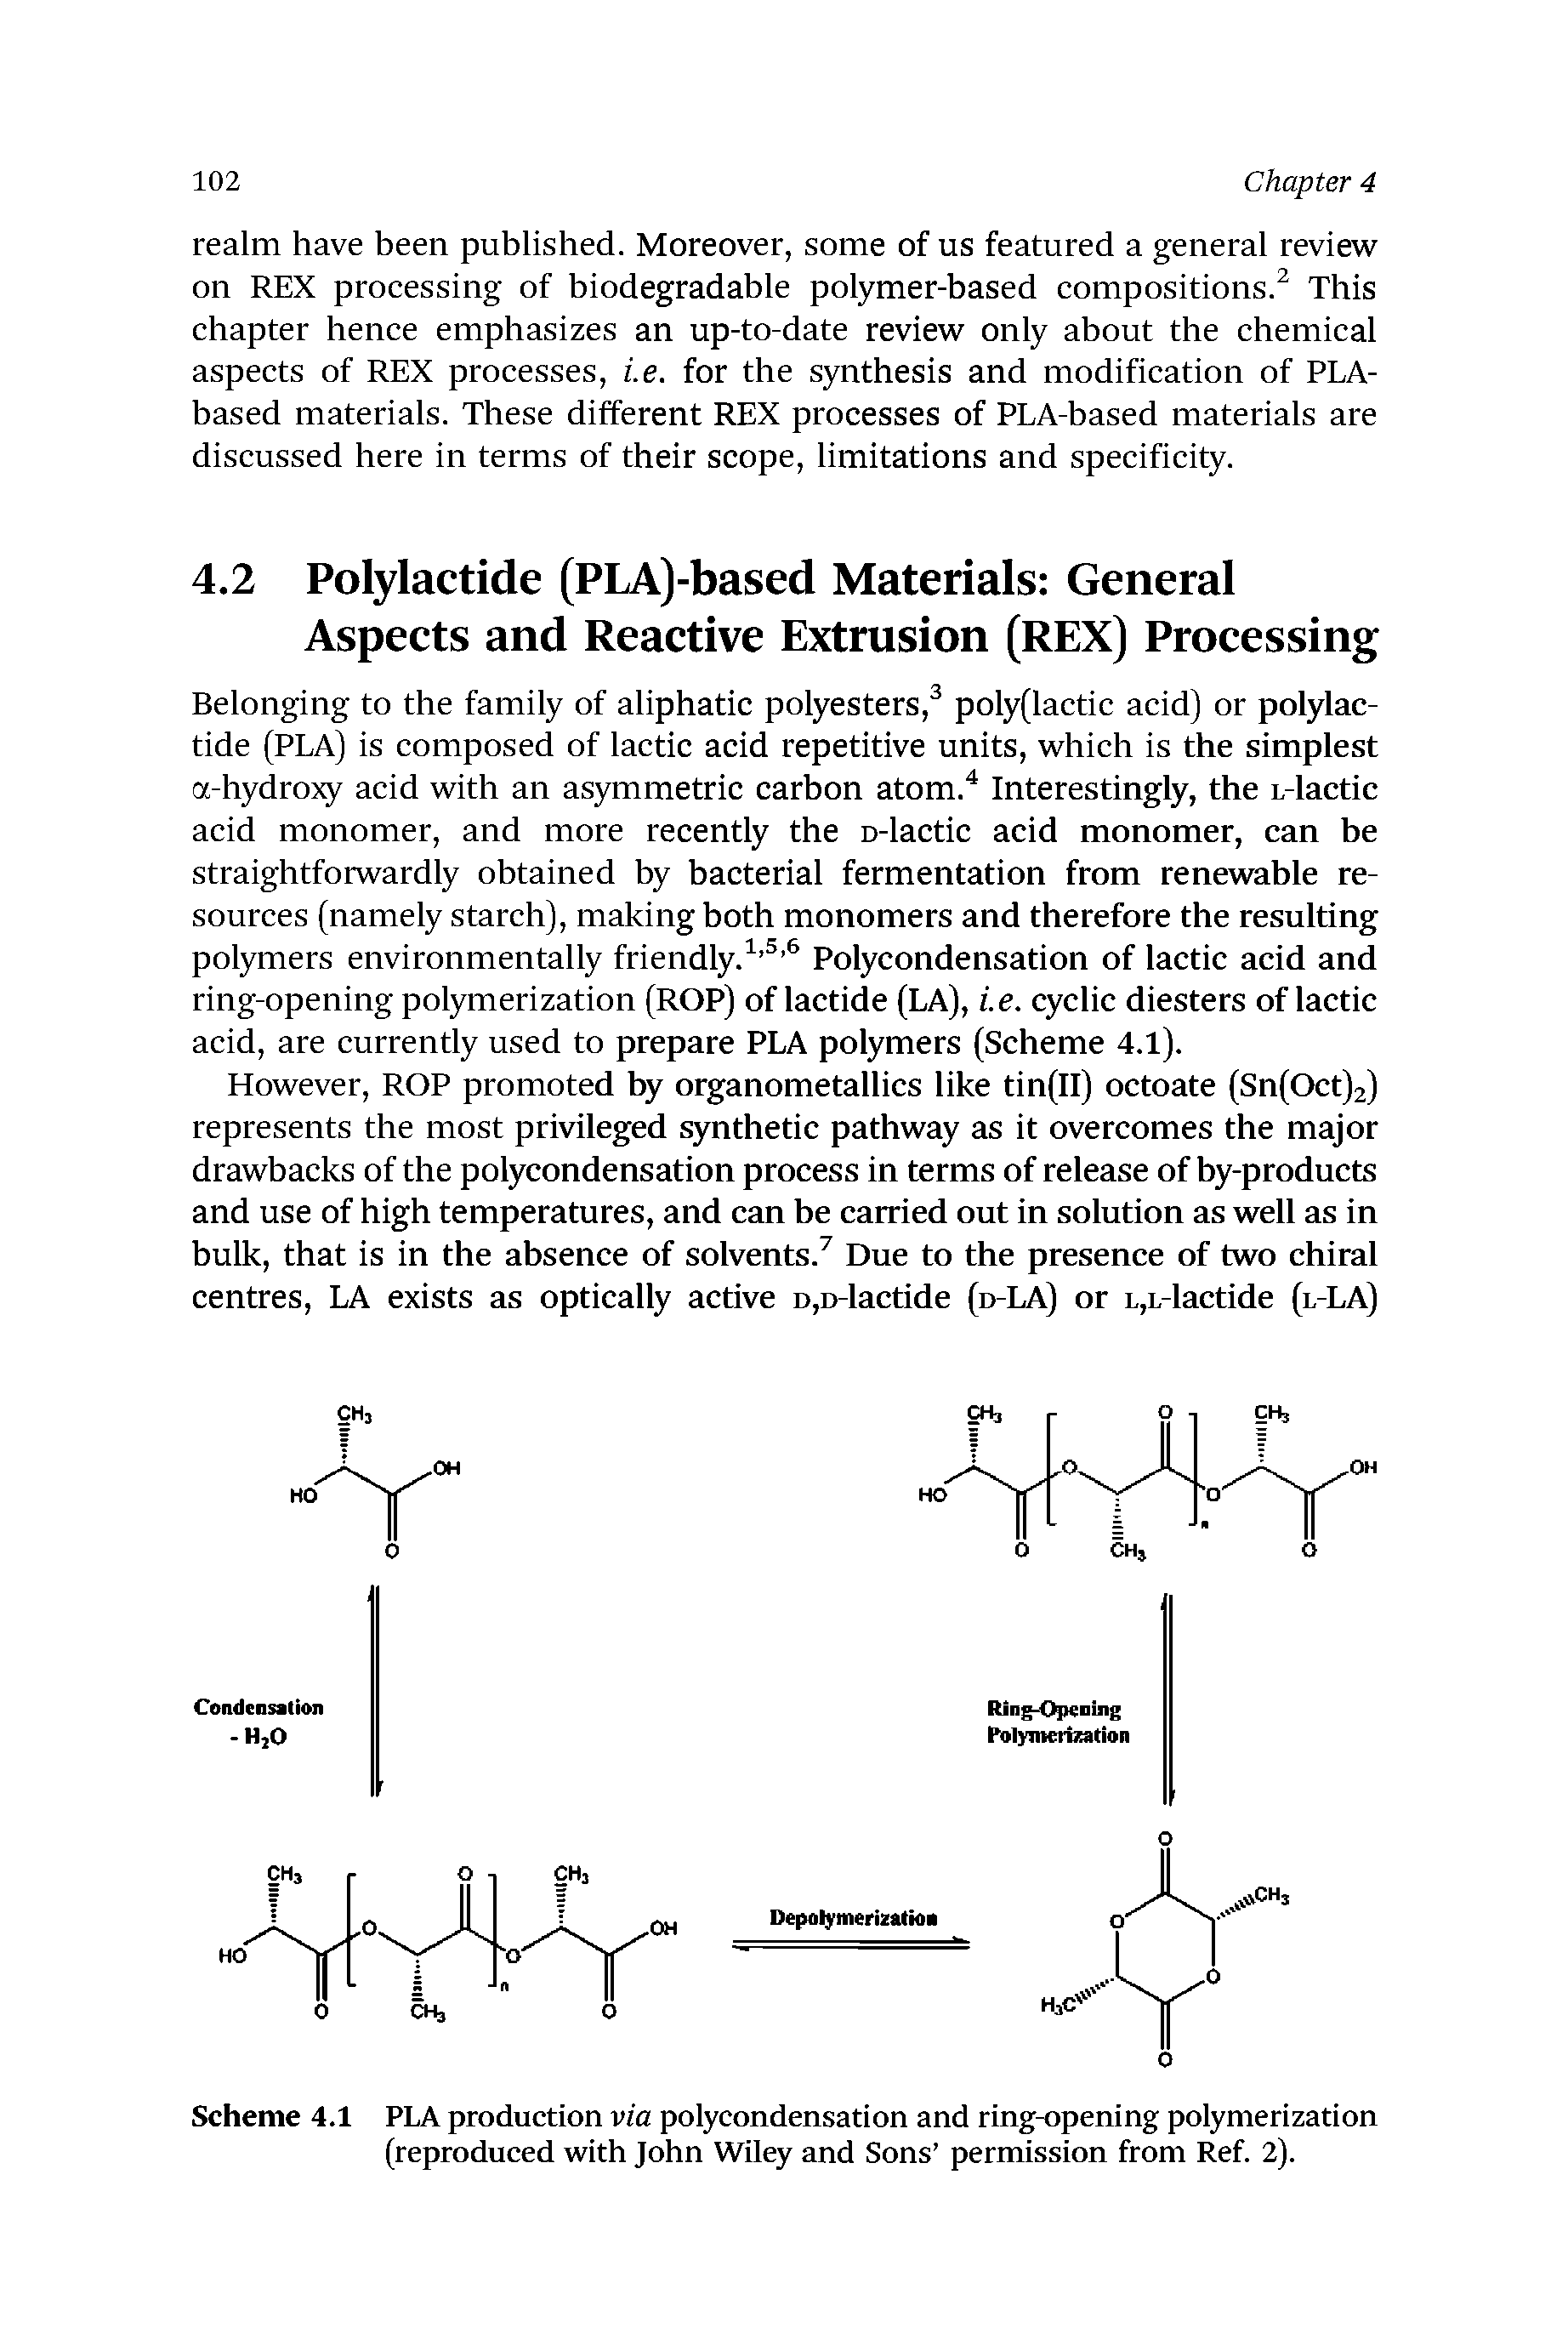 Scheme 4.1 PLA production via polycondensation and ring-opening polymerization (reproduced with John Wiley and Sons permission from Ref. 2).